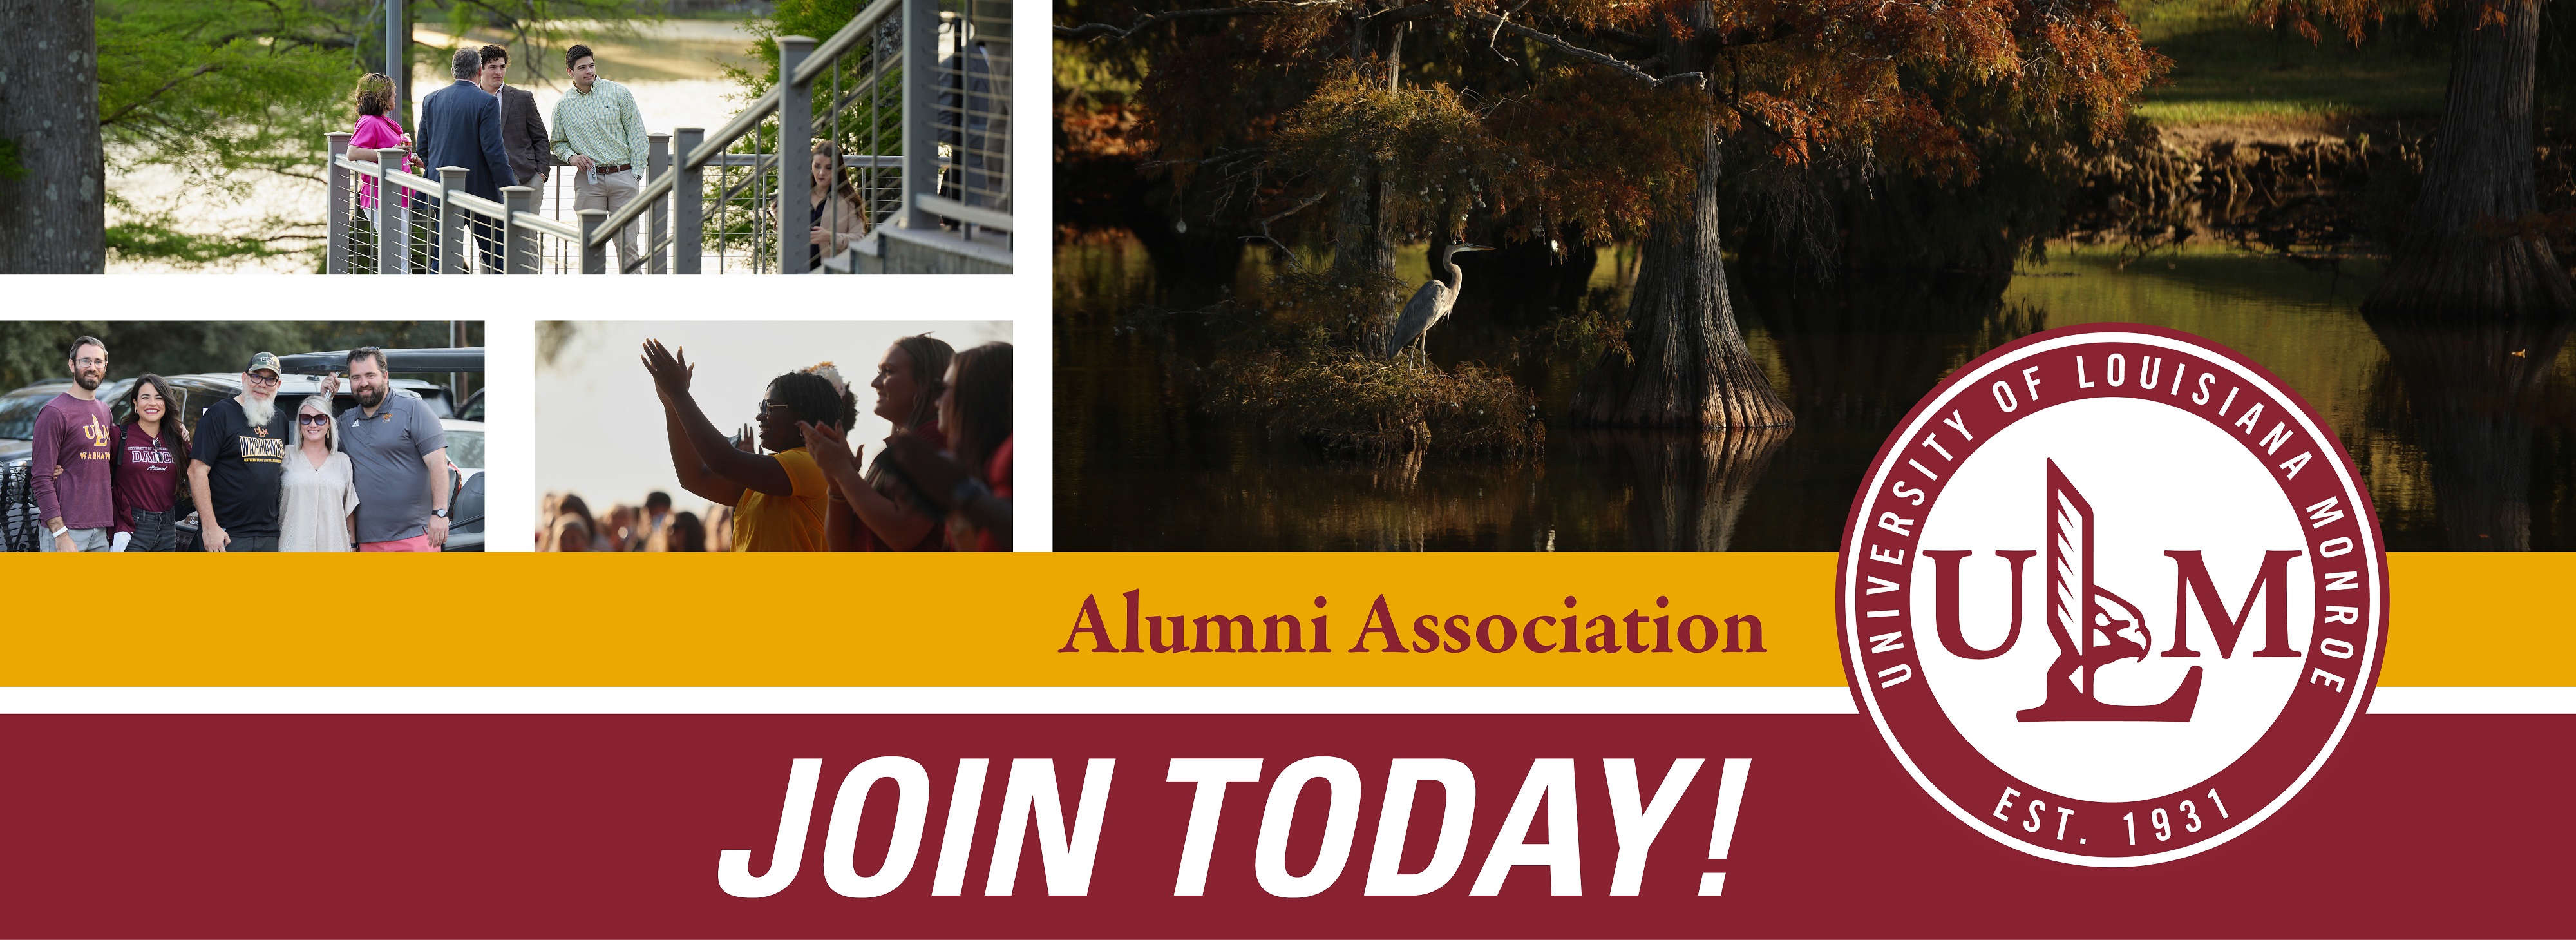  Alumni association logo with text that reads, "JOIN TODAY!" and a collage of pictures from around campus.